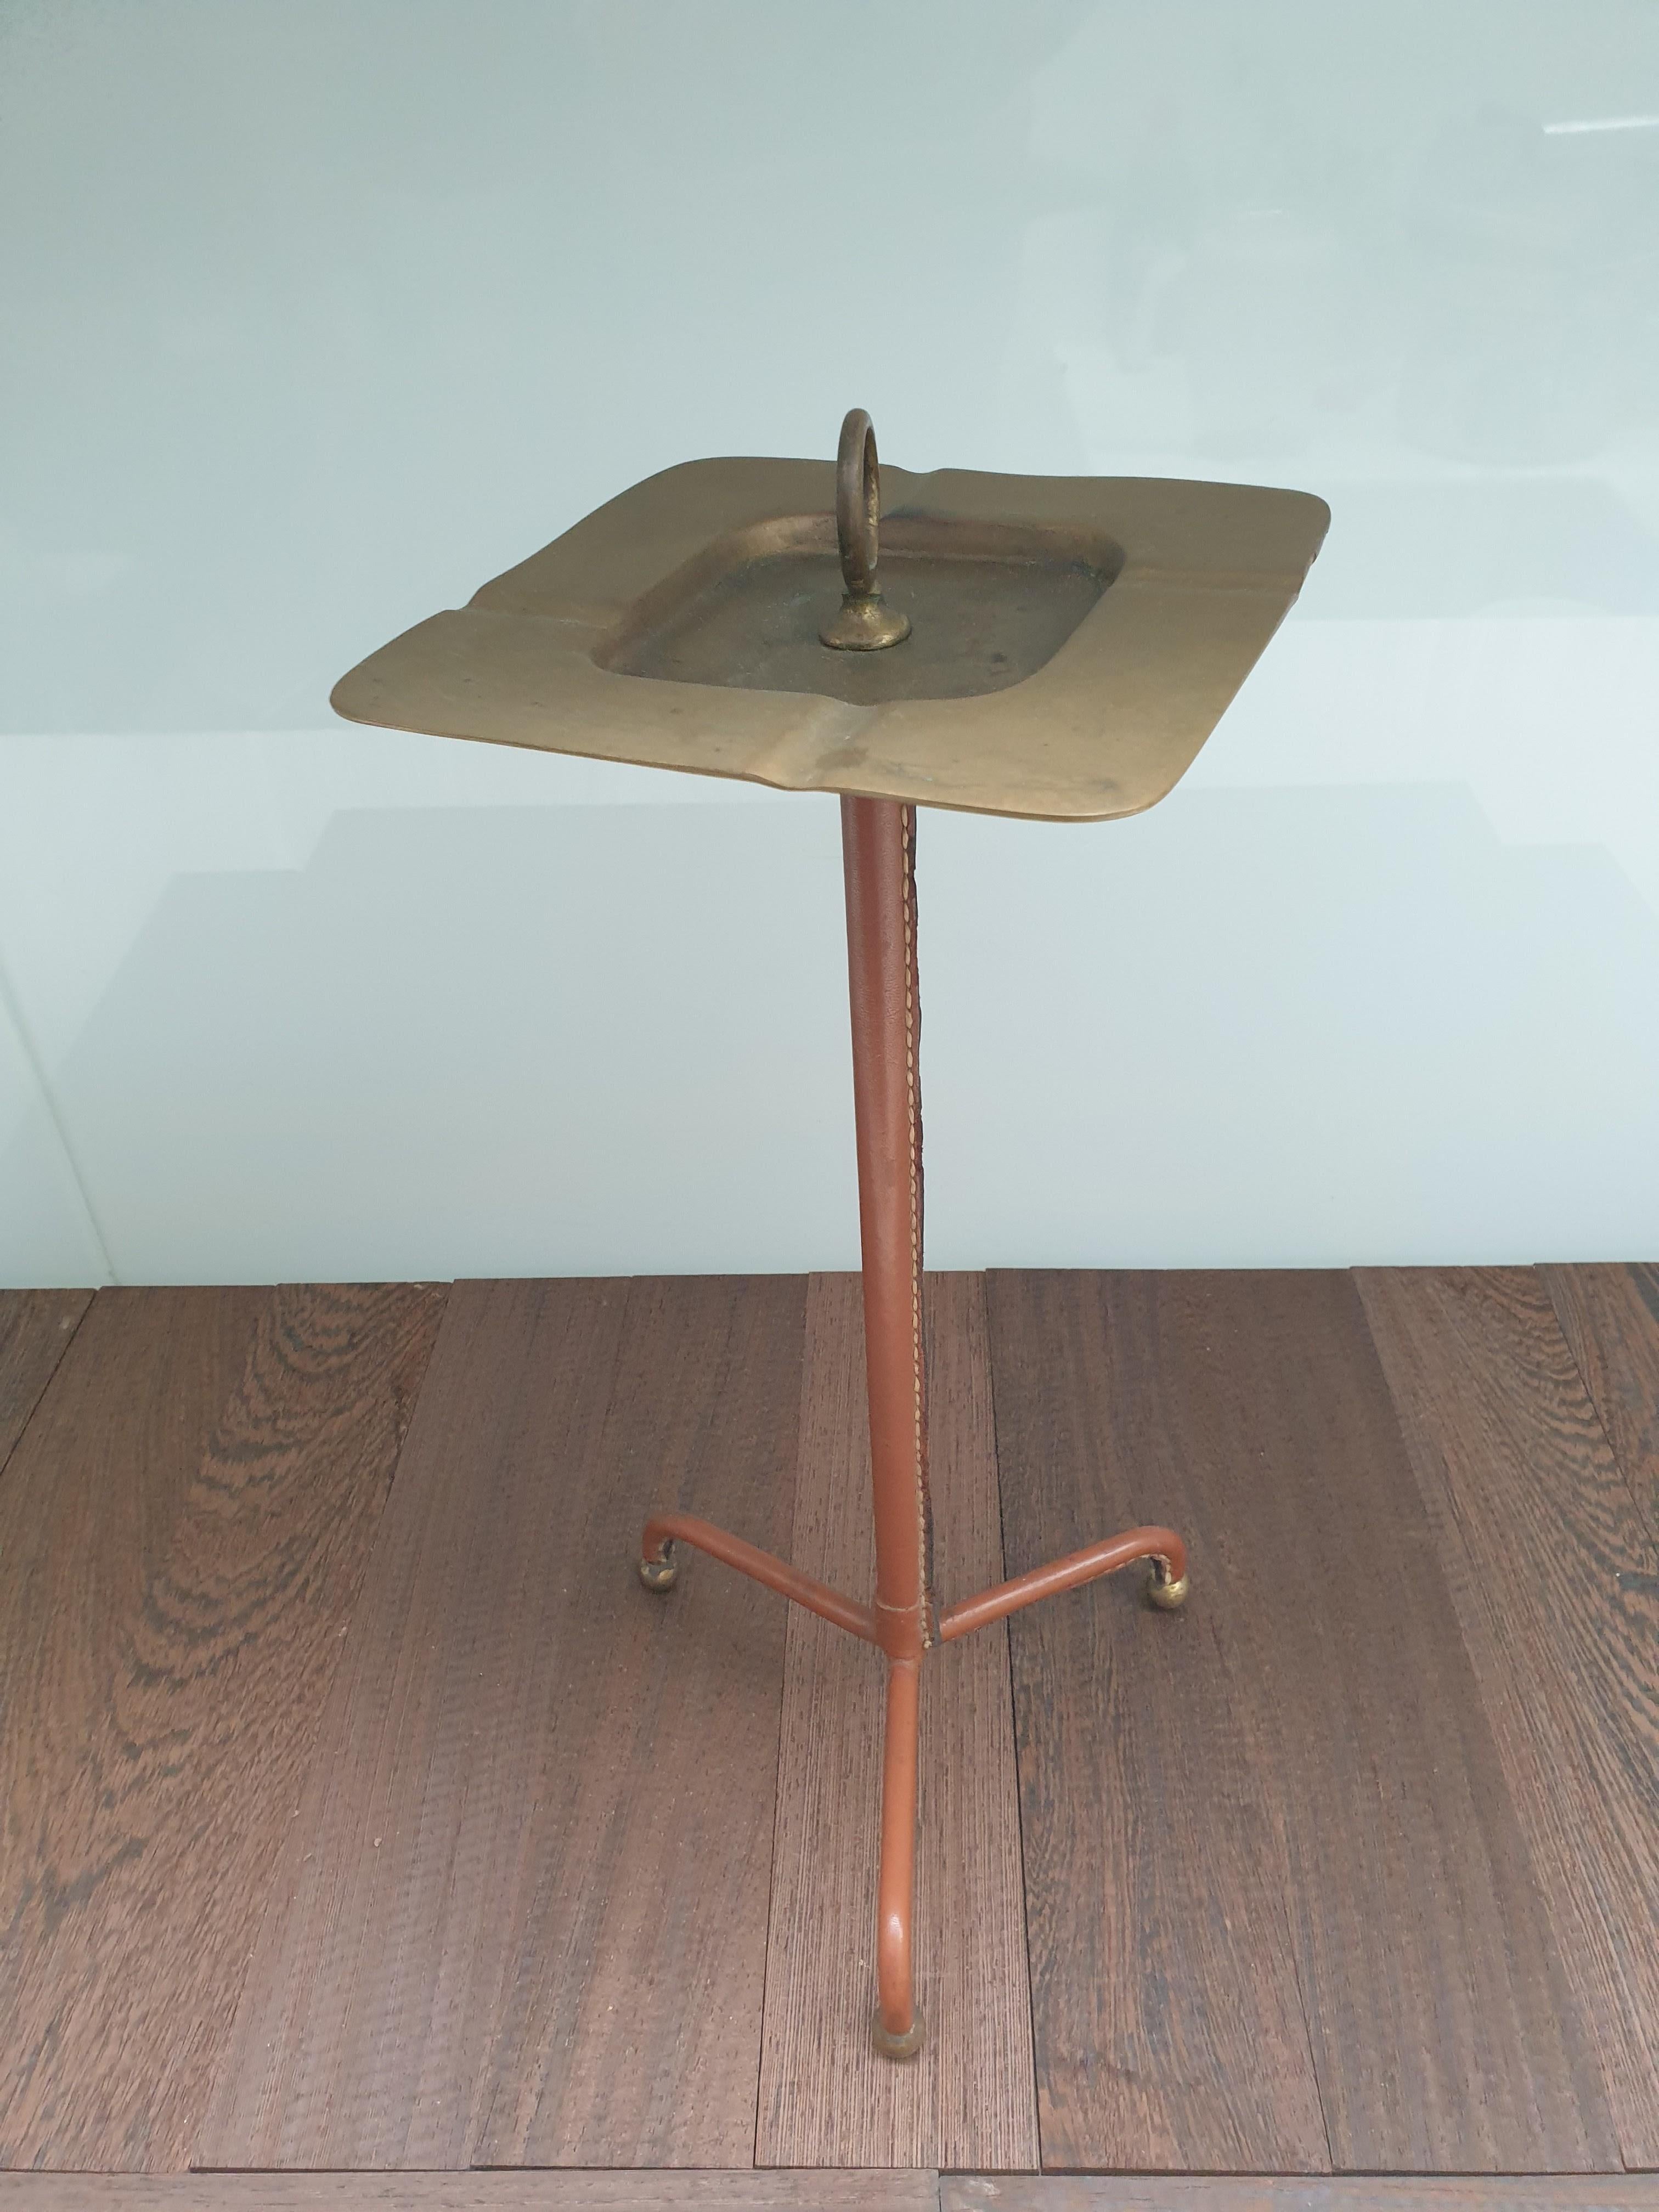 Mid-Century Modern Stitched leather ashtray on stand by Jacques adnet.